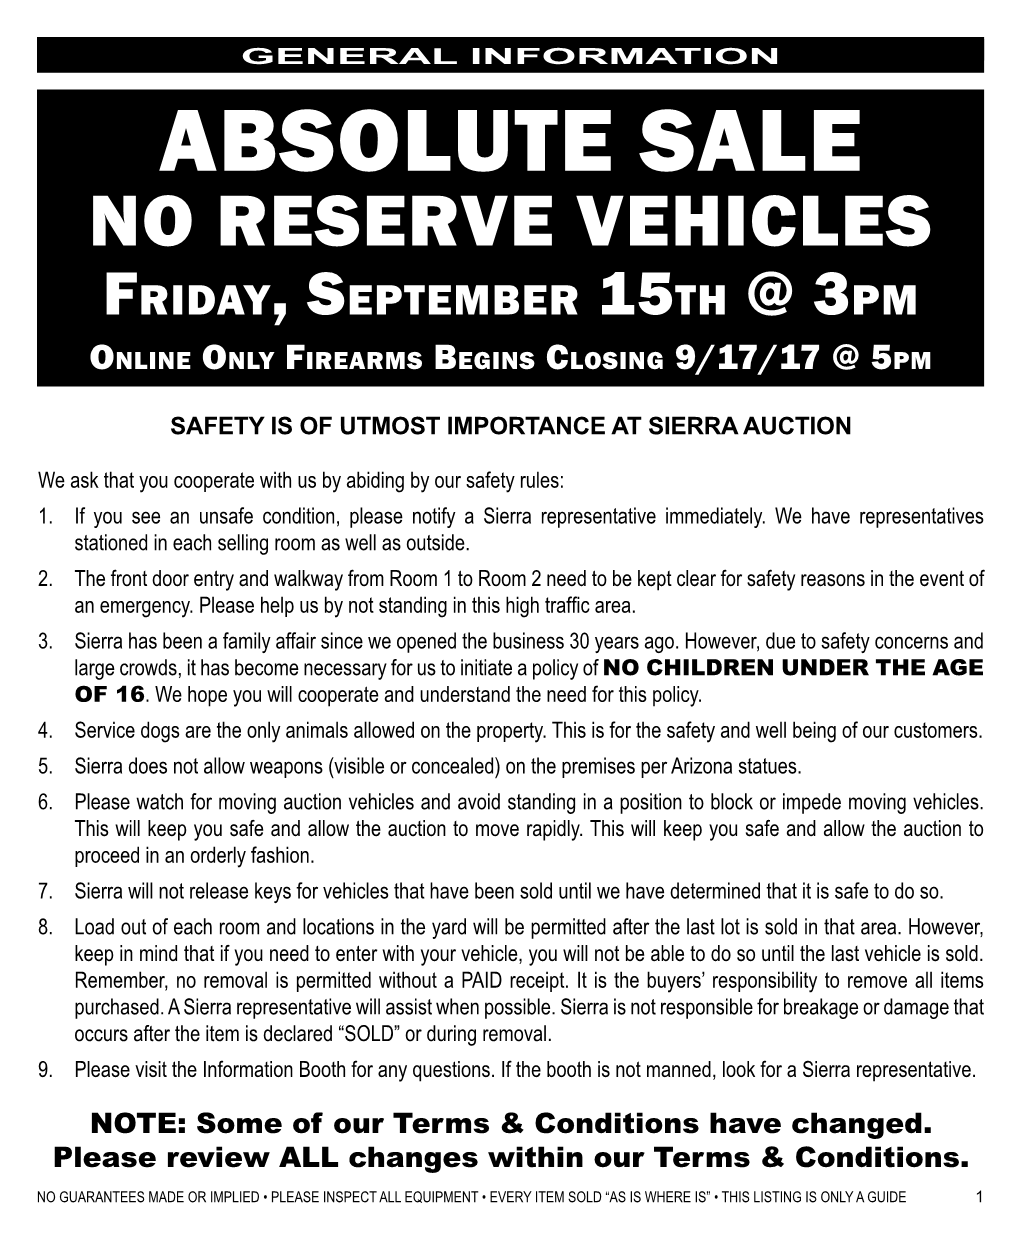 ABSOLUTE SALE NO RESERVE VEHICLES Friday, September 15Th @ 3Pm Online Only Firearms Begins Closing 9/17/17 @ 5Pm